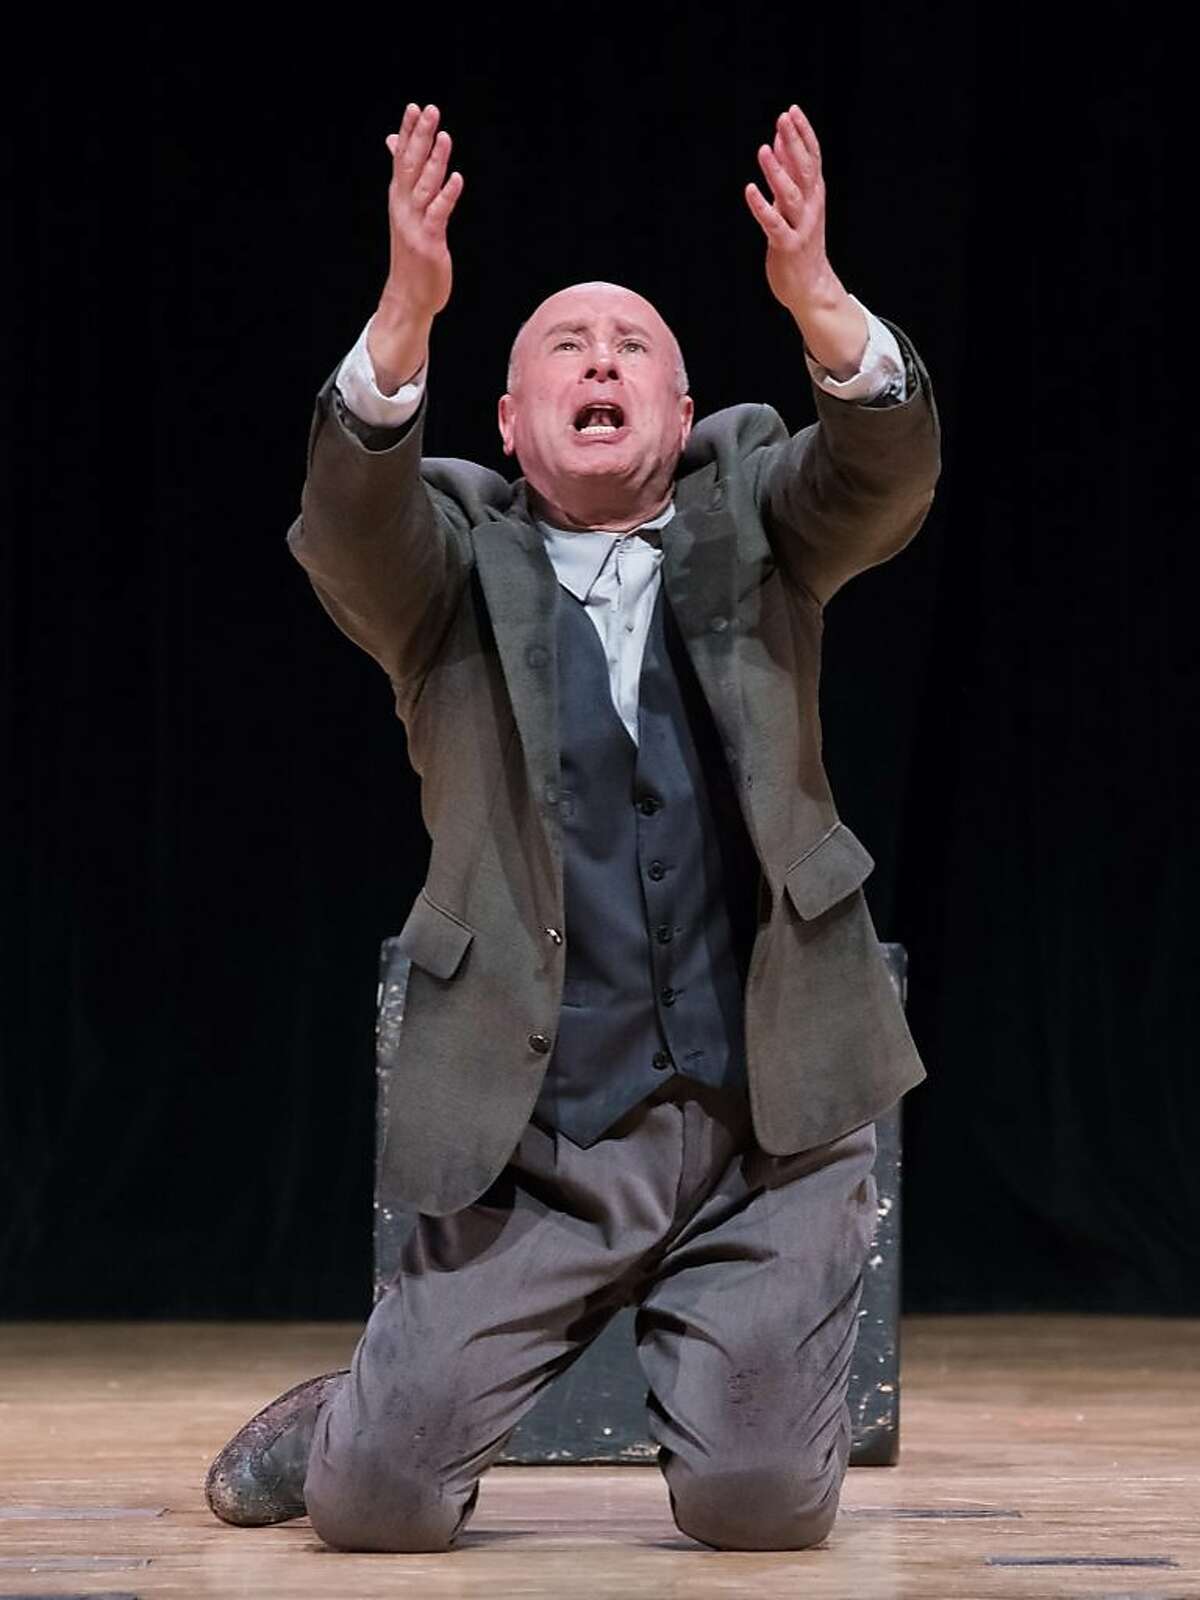 Roger Grunwald in "Obligation," presented by the Mitzvah Project in association with PlayGround.